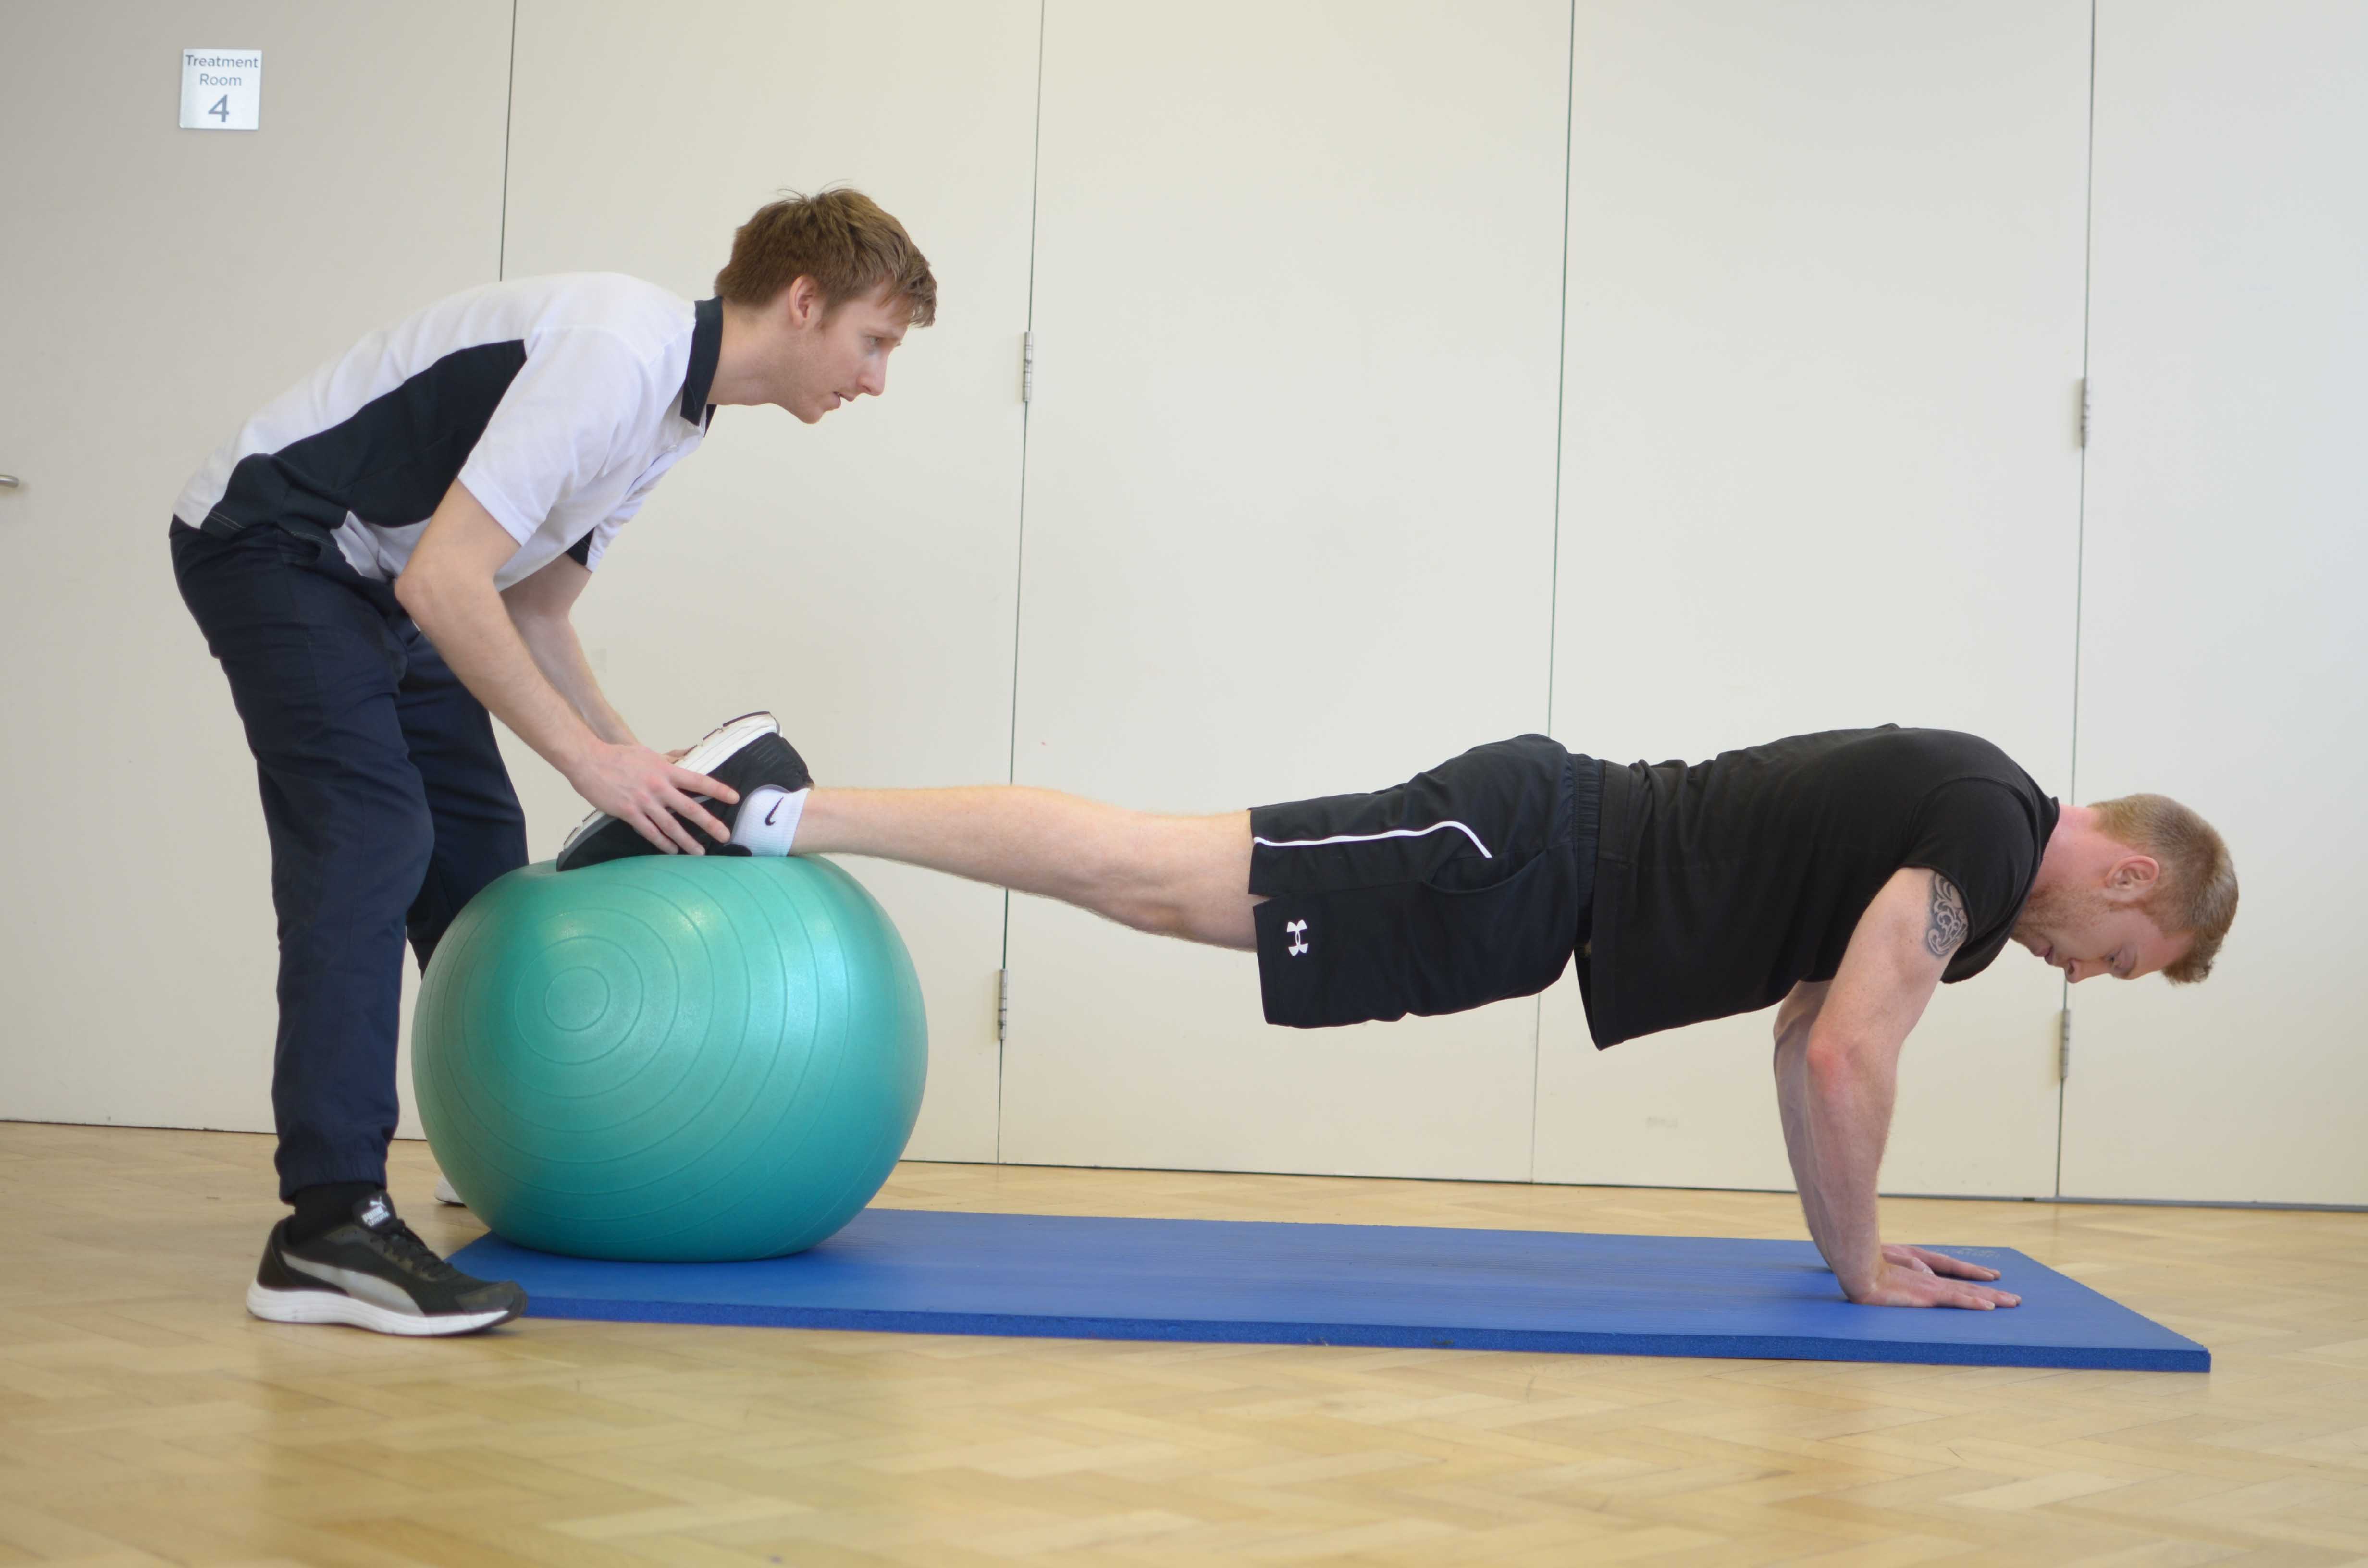 Our physiotherapist provide sport specific rehabilitation following an injury